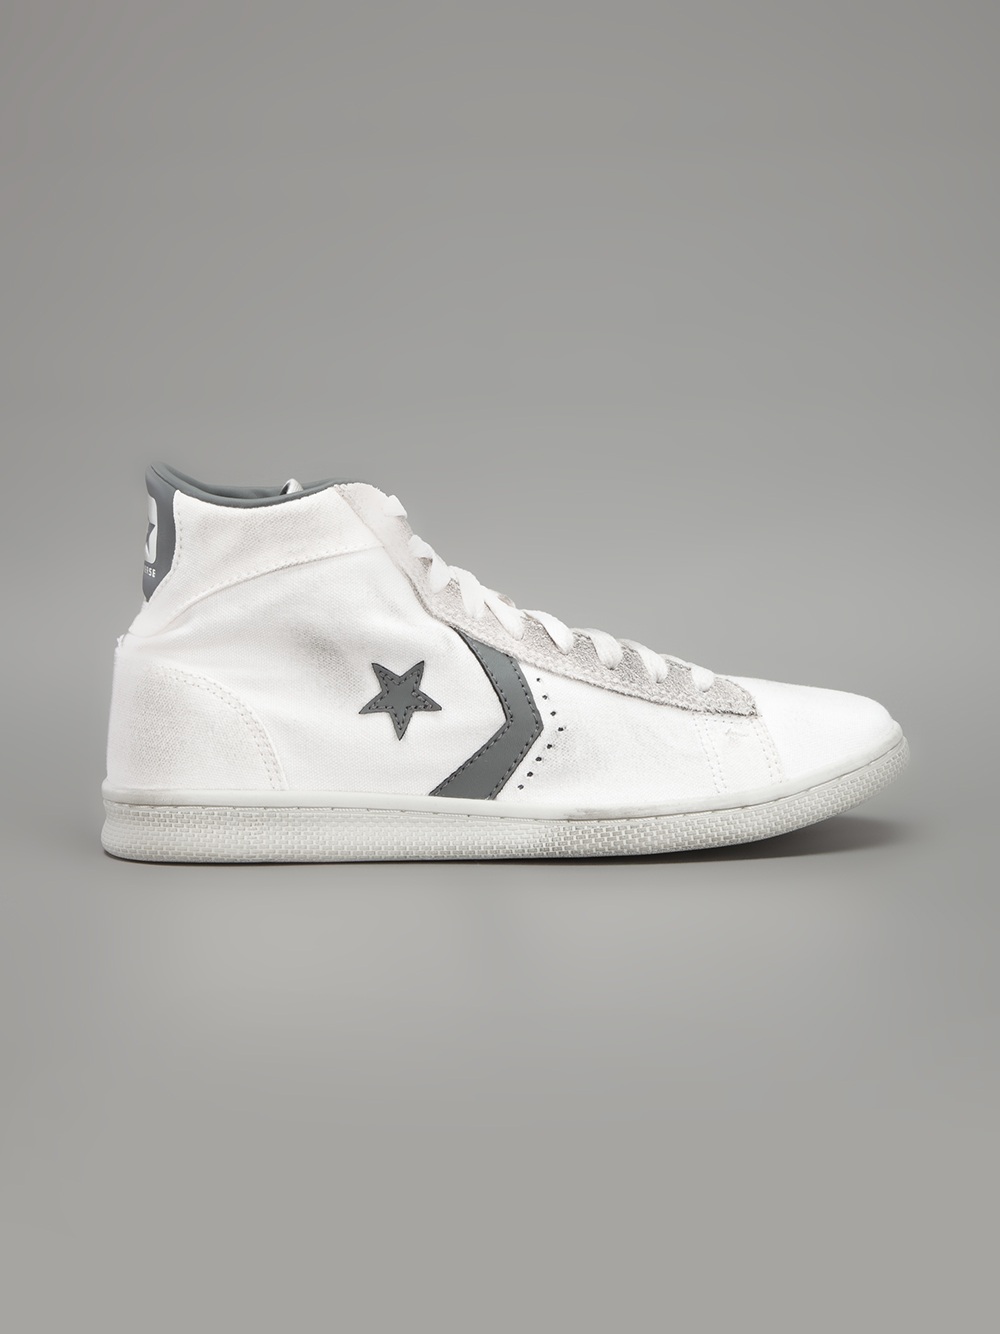 Converse Pro Leather Lp Mid Sneaker in White - Lyst